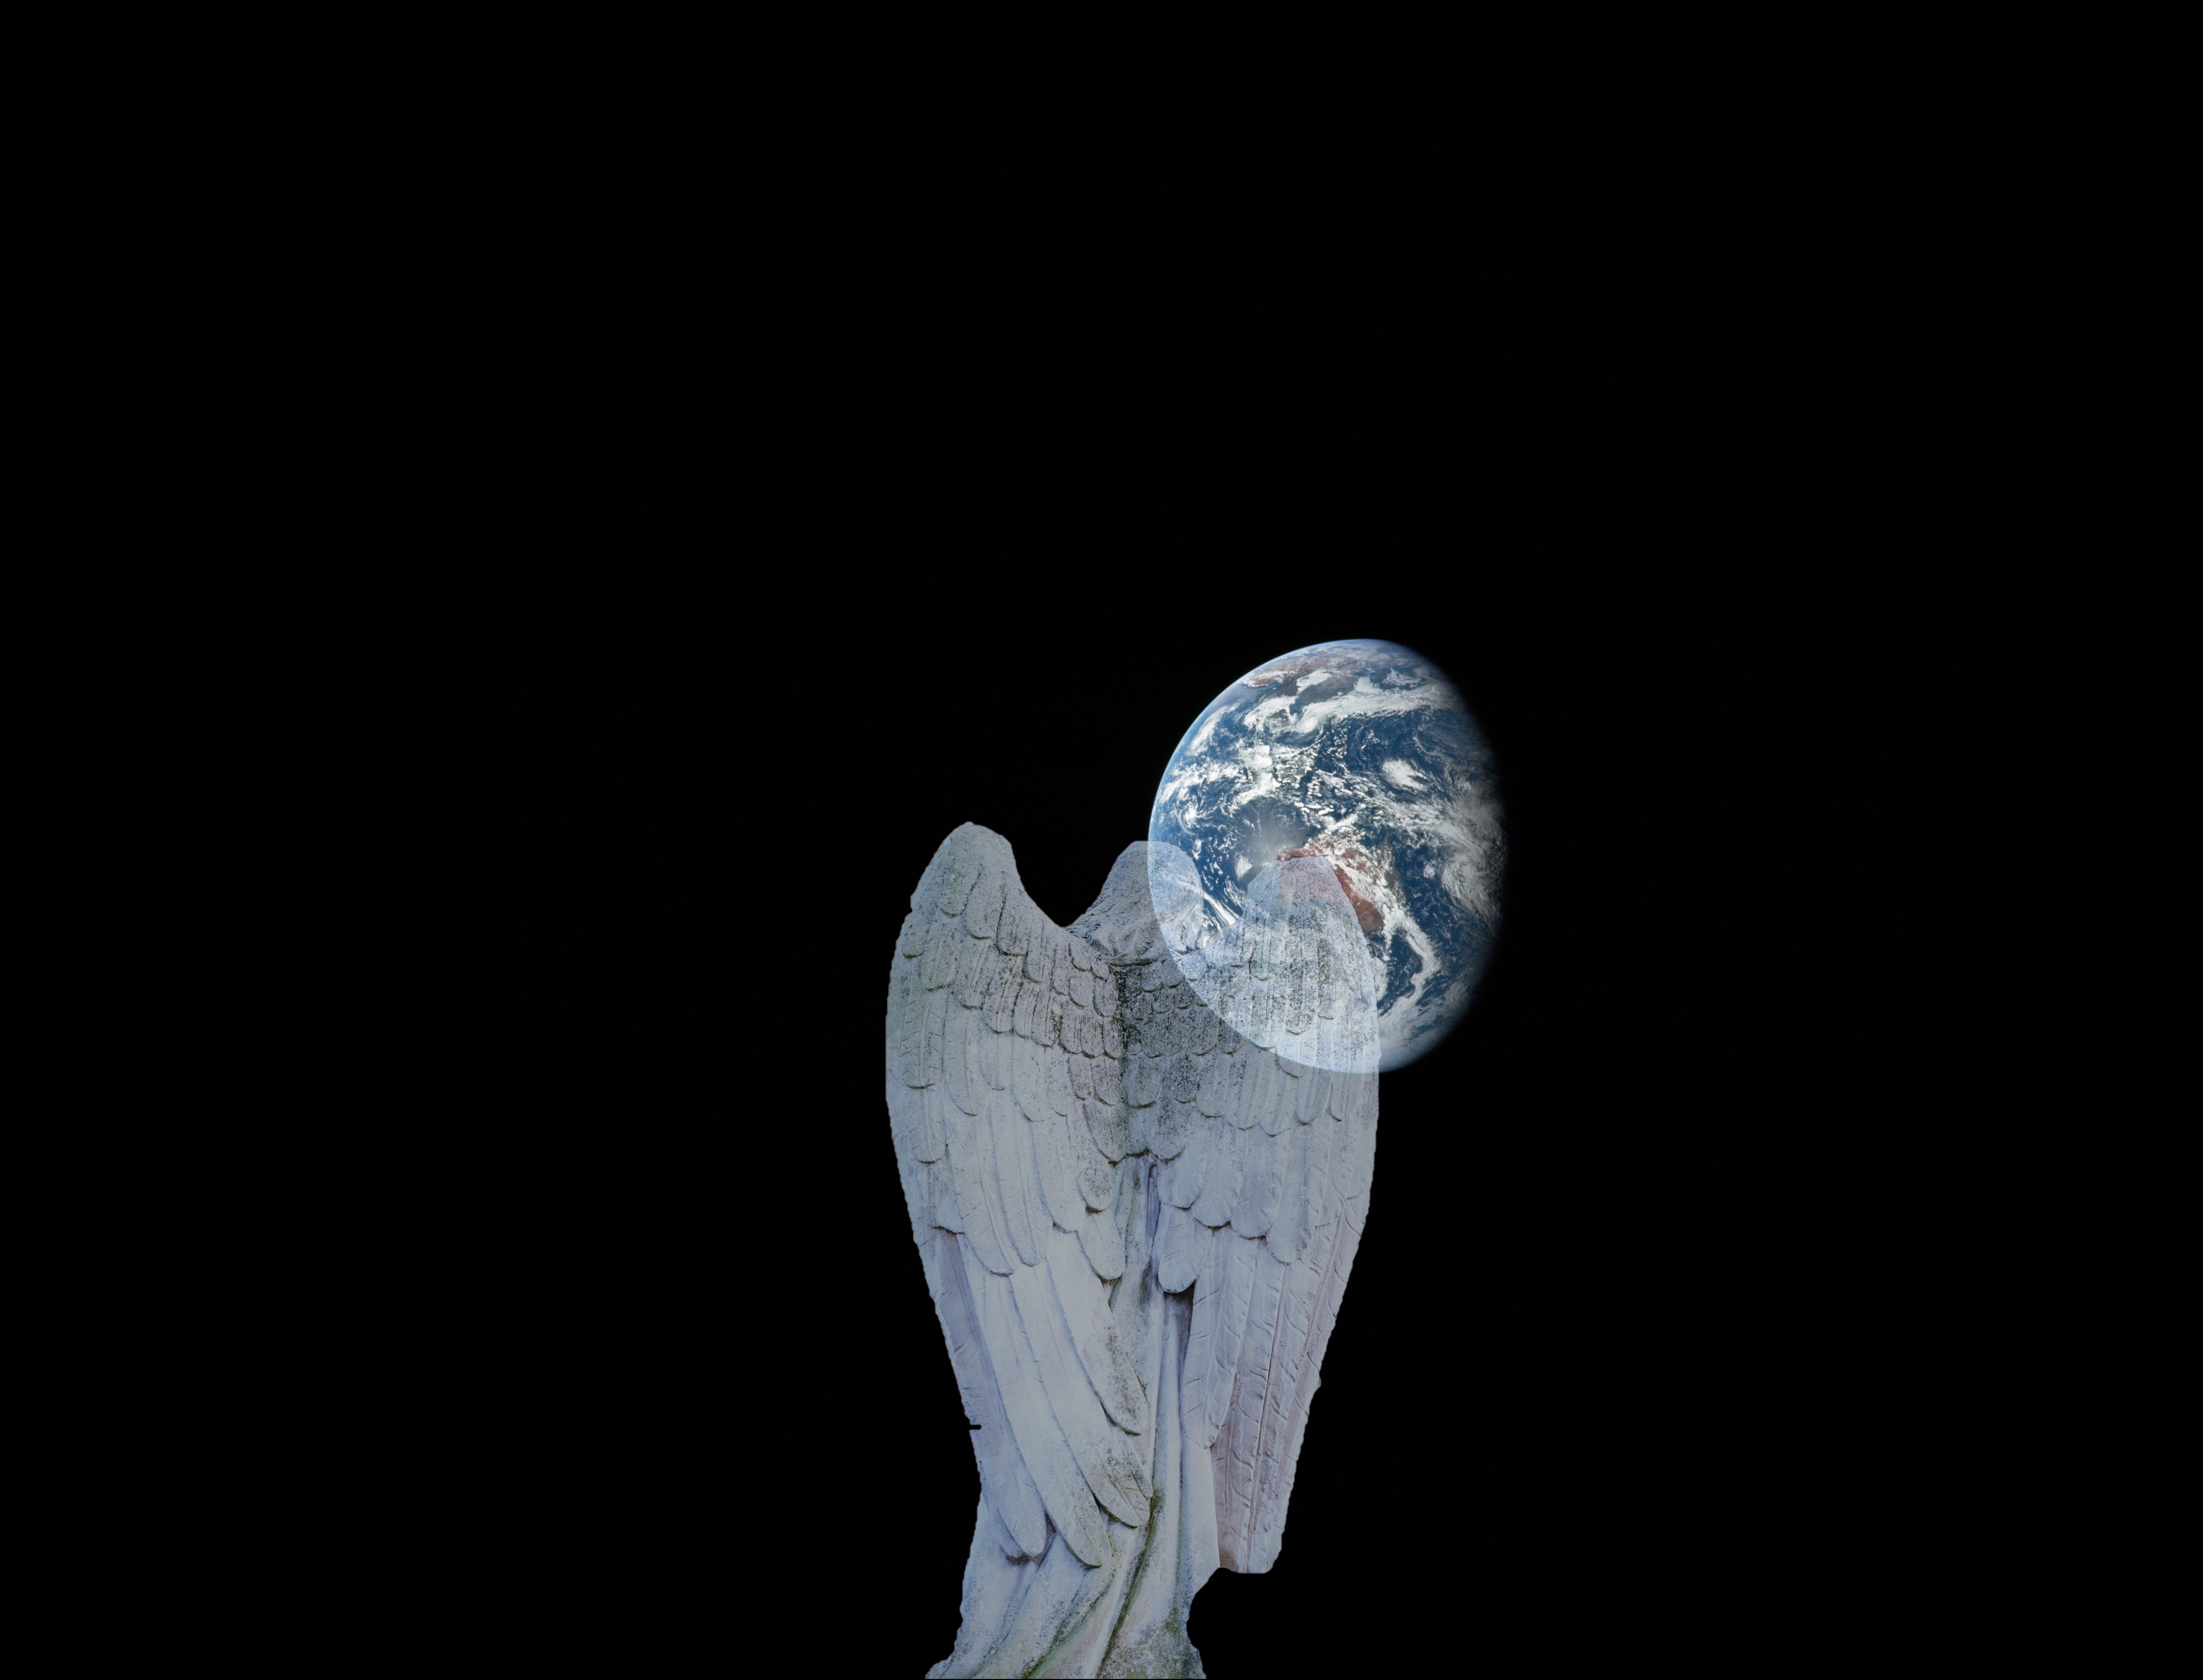 images of world and image of the back of an Angel with the Angel facing the Earth